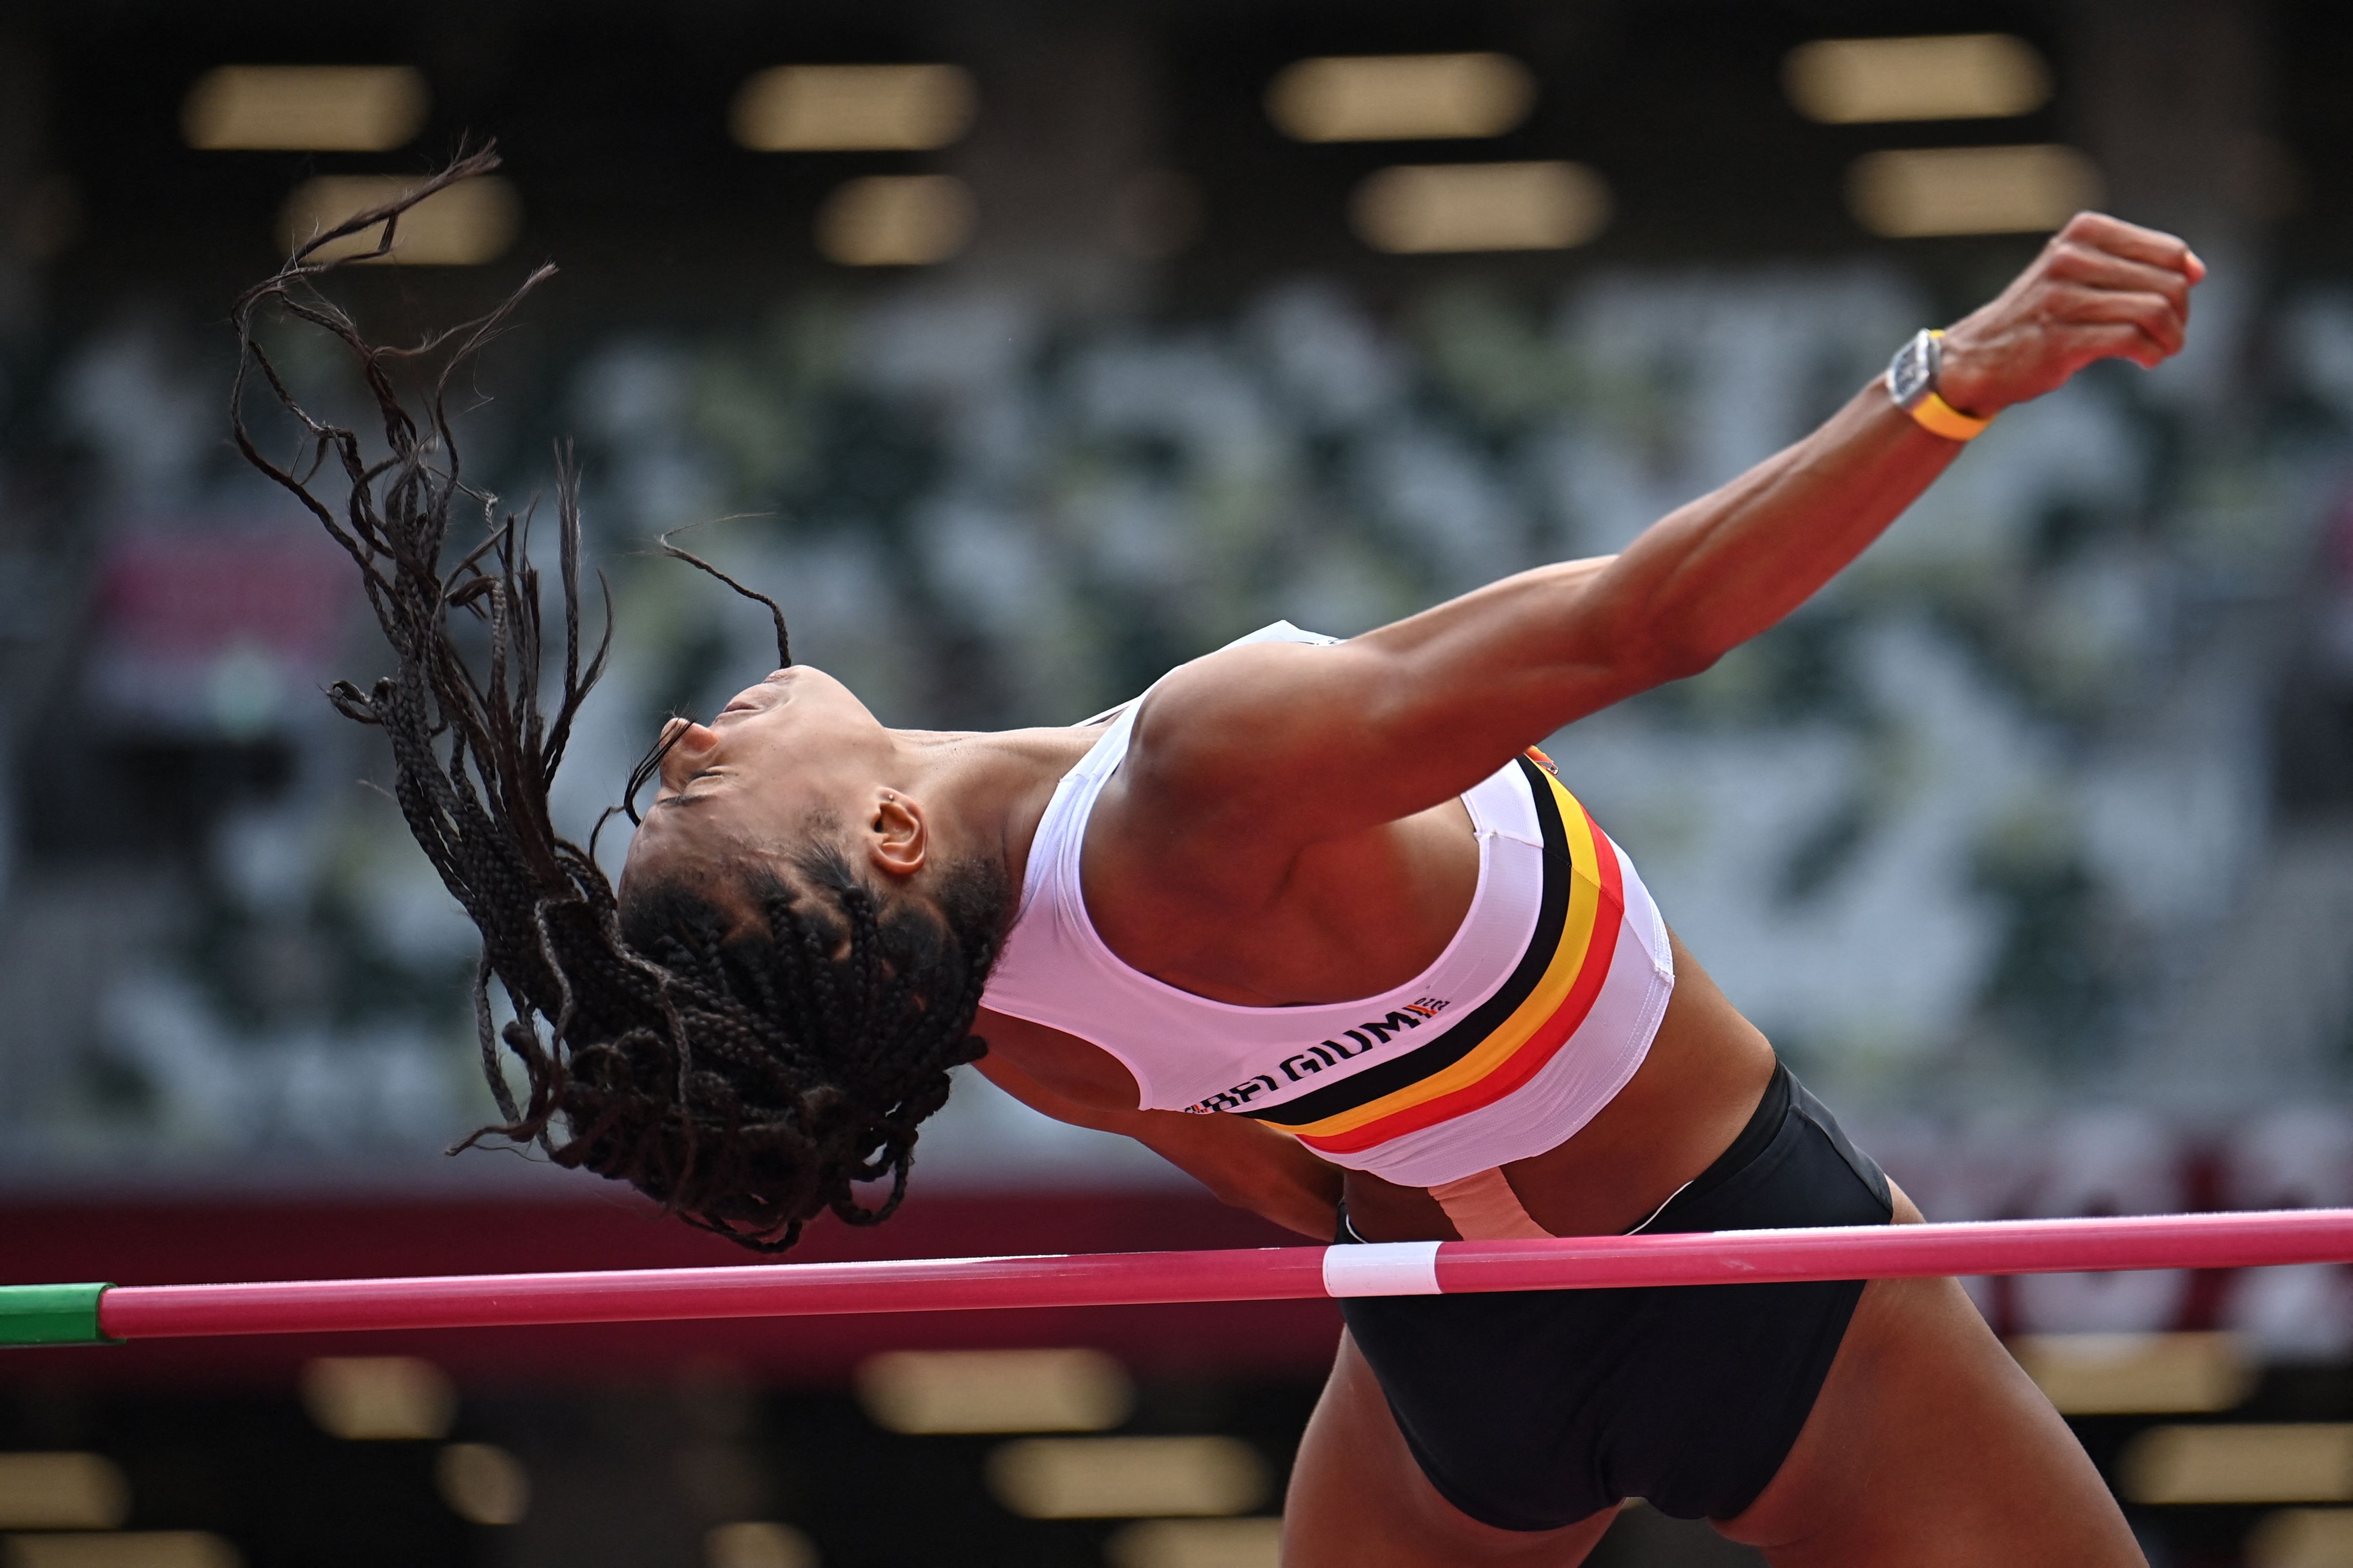 Belgium's Nafissatou Thiam competes in the women's heptathlon high jump during the Tokyo 2020 Olympic Games at the Olympic Stadium in Tokyo on August 4